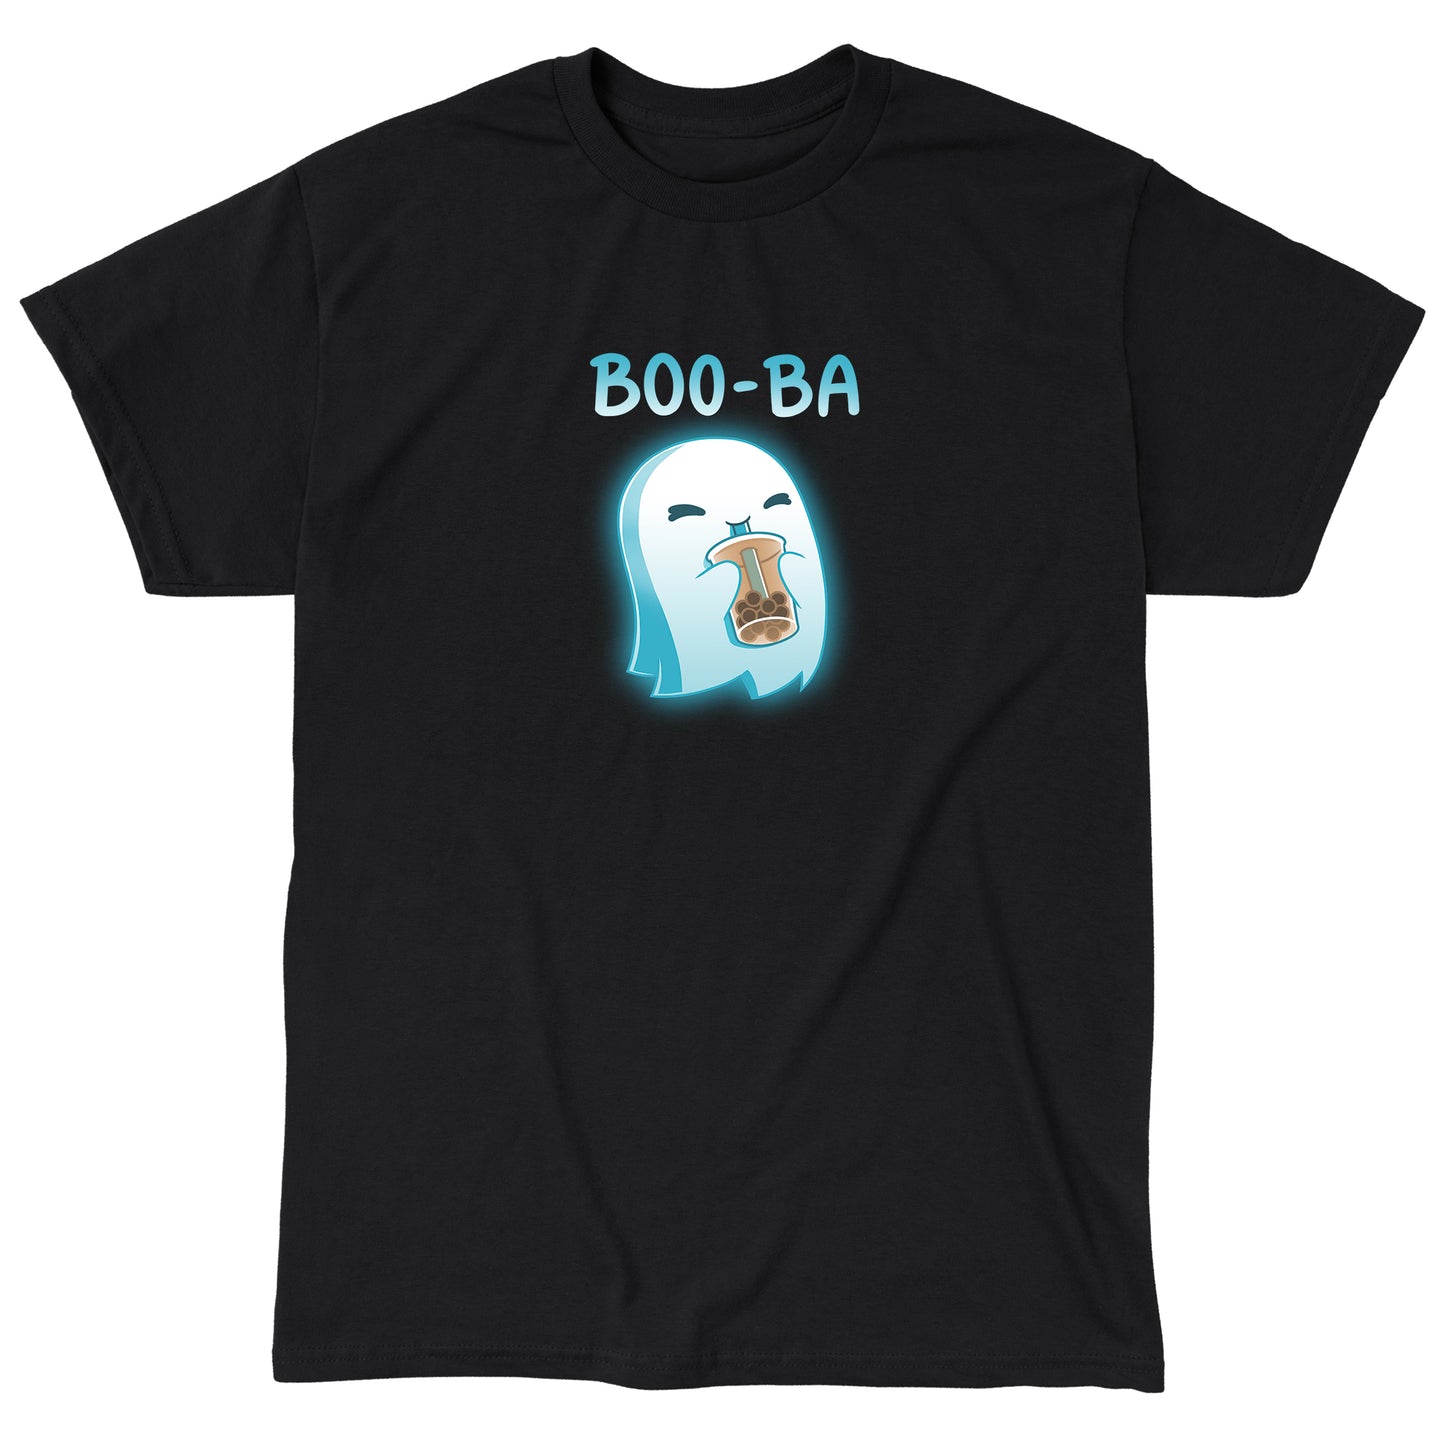 Classic Cotton T-shirt_TeeTurtle Boo-ba black t-shirt featuring a cheerful ghost sipping a boba drink.